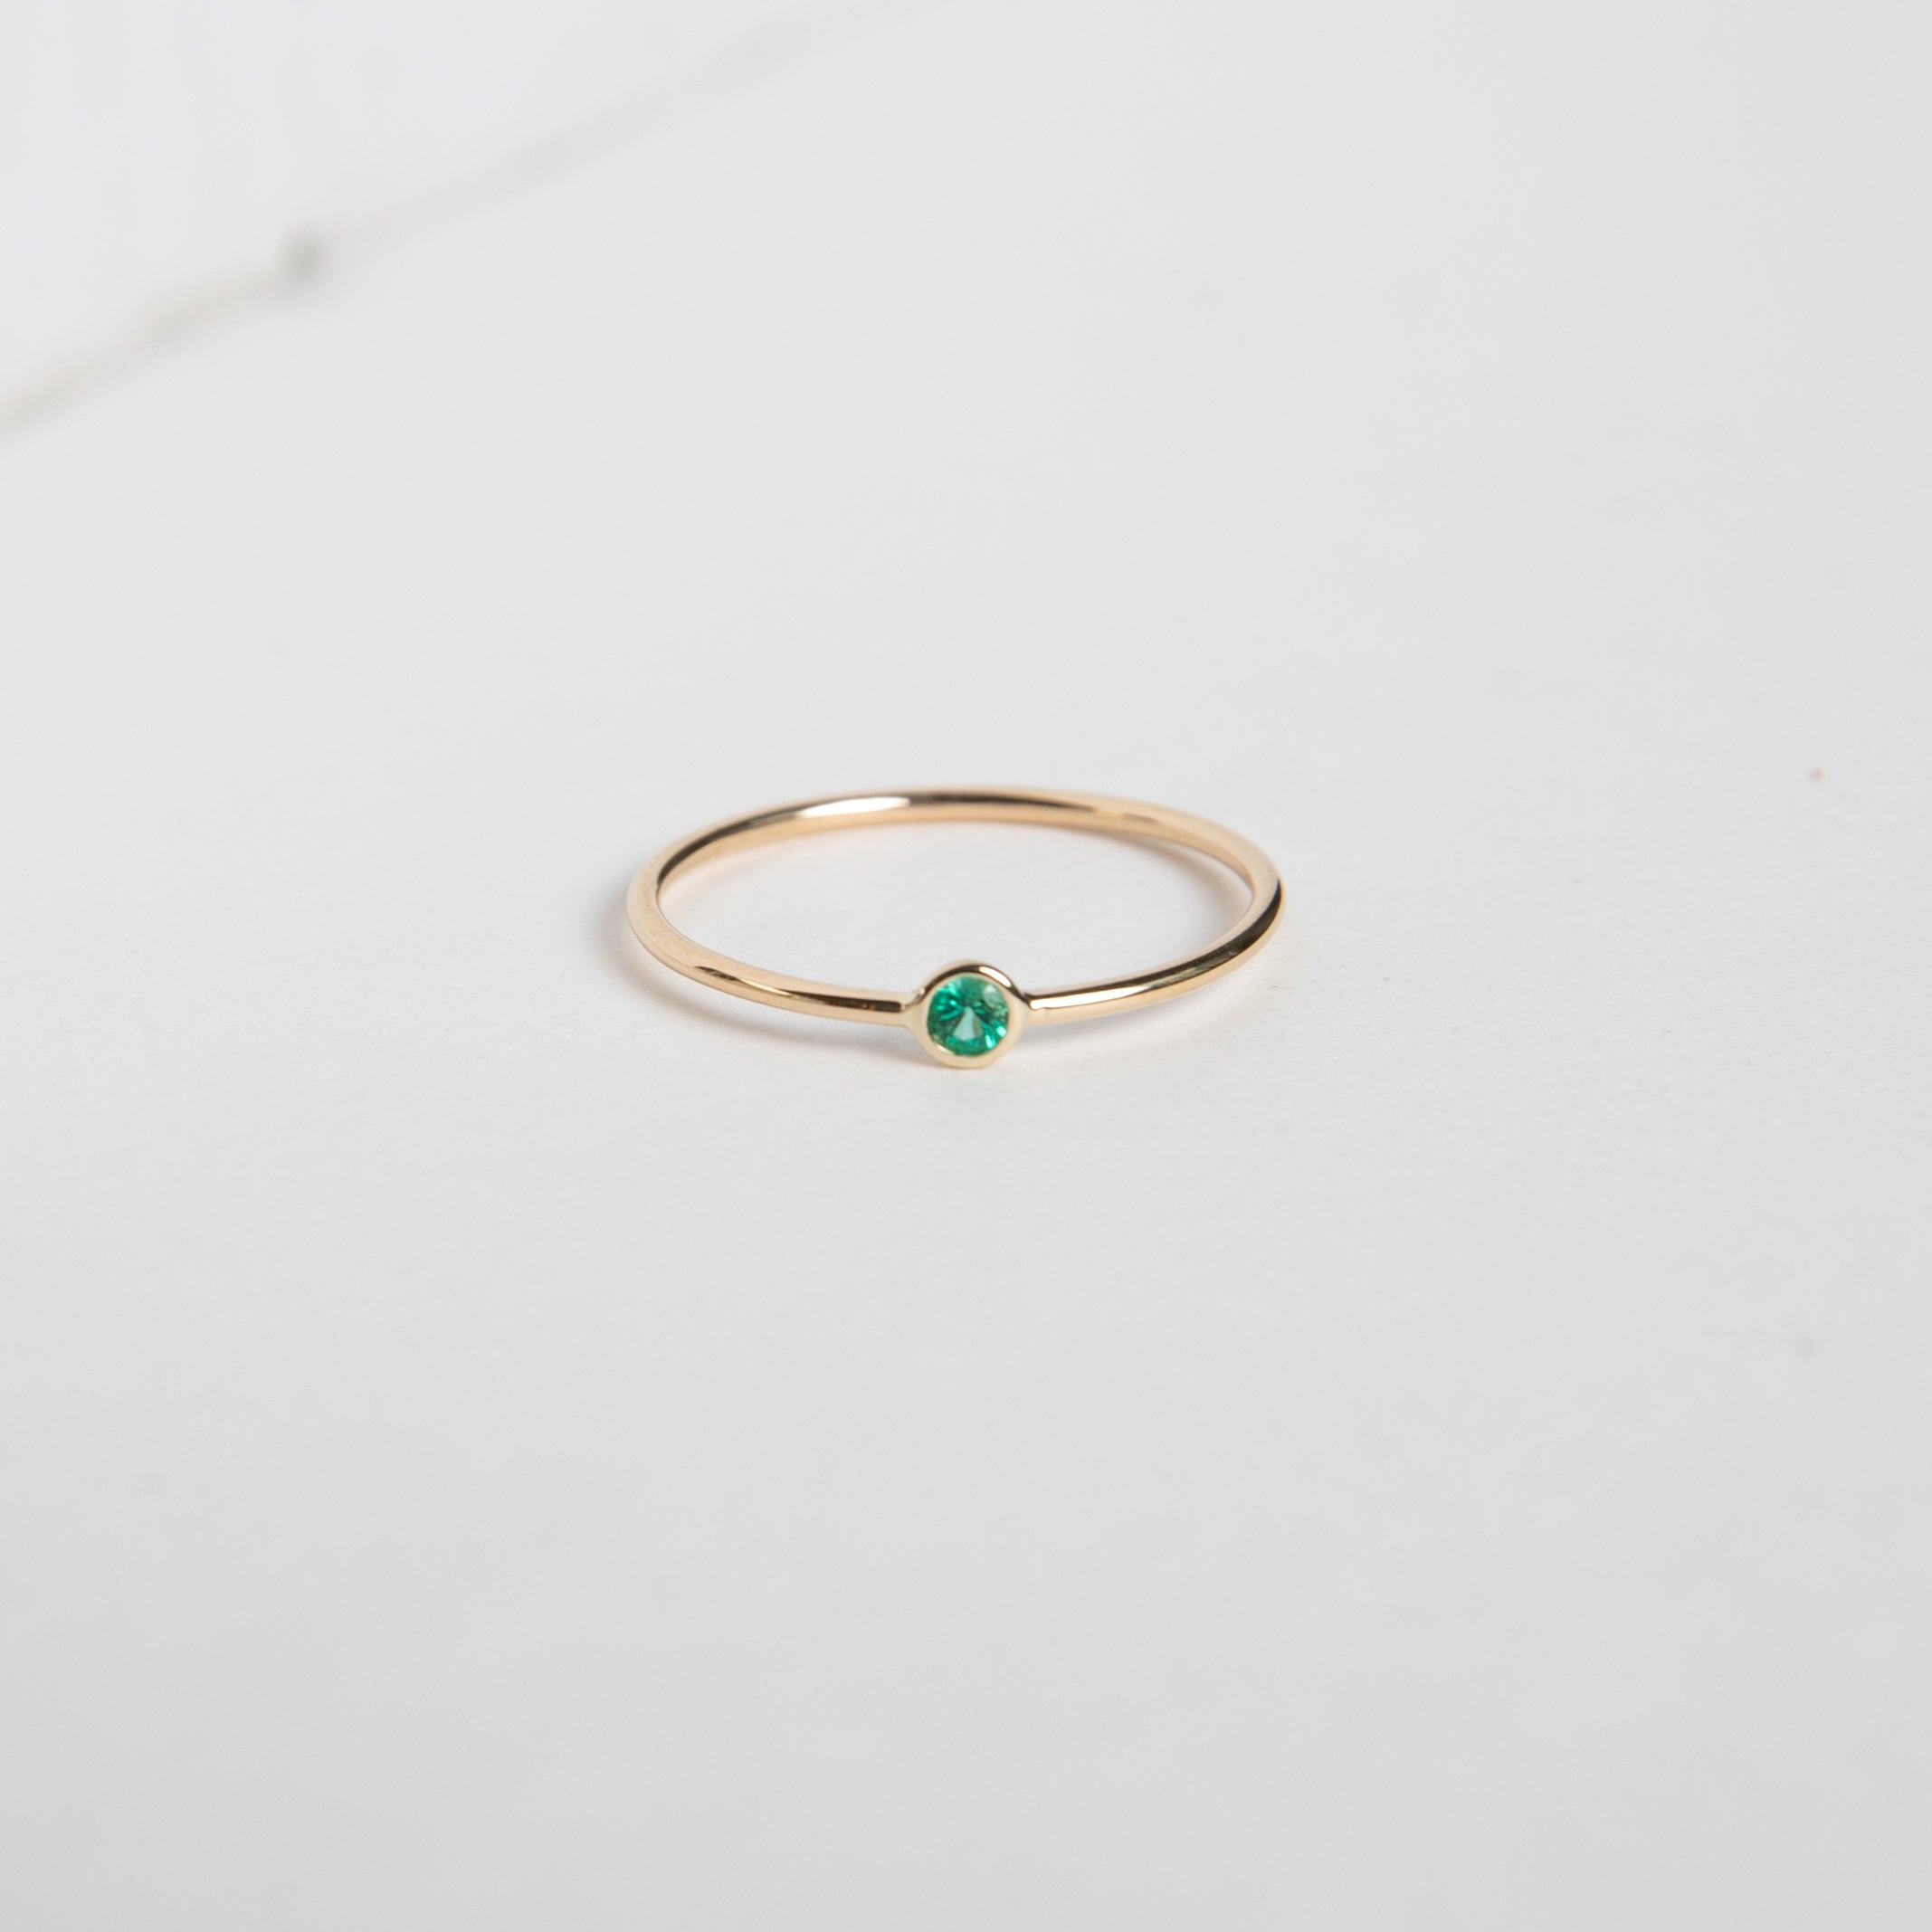 Large Kaya Simple Ring in 14k Gold set with Emerald by SHW Fine Jewelry